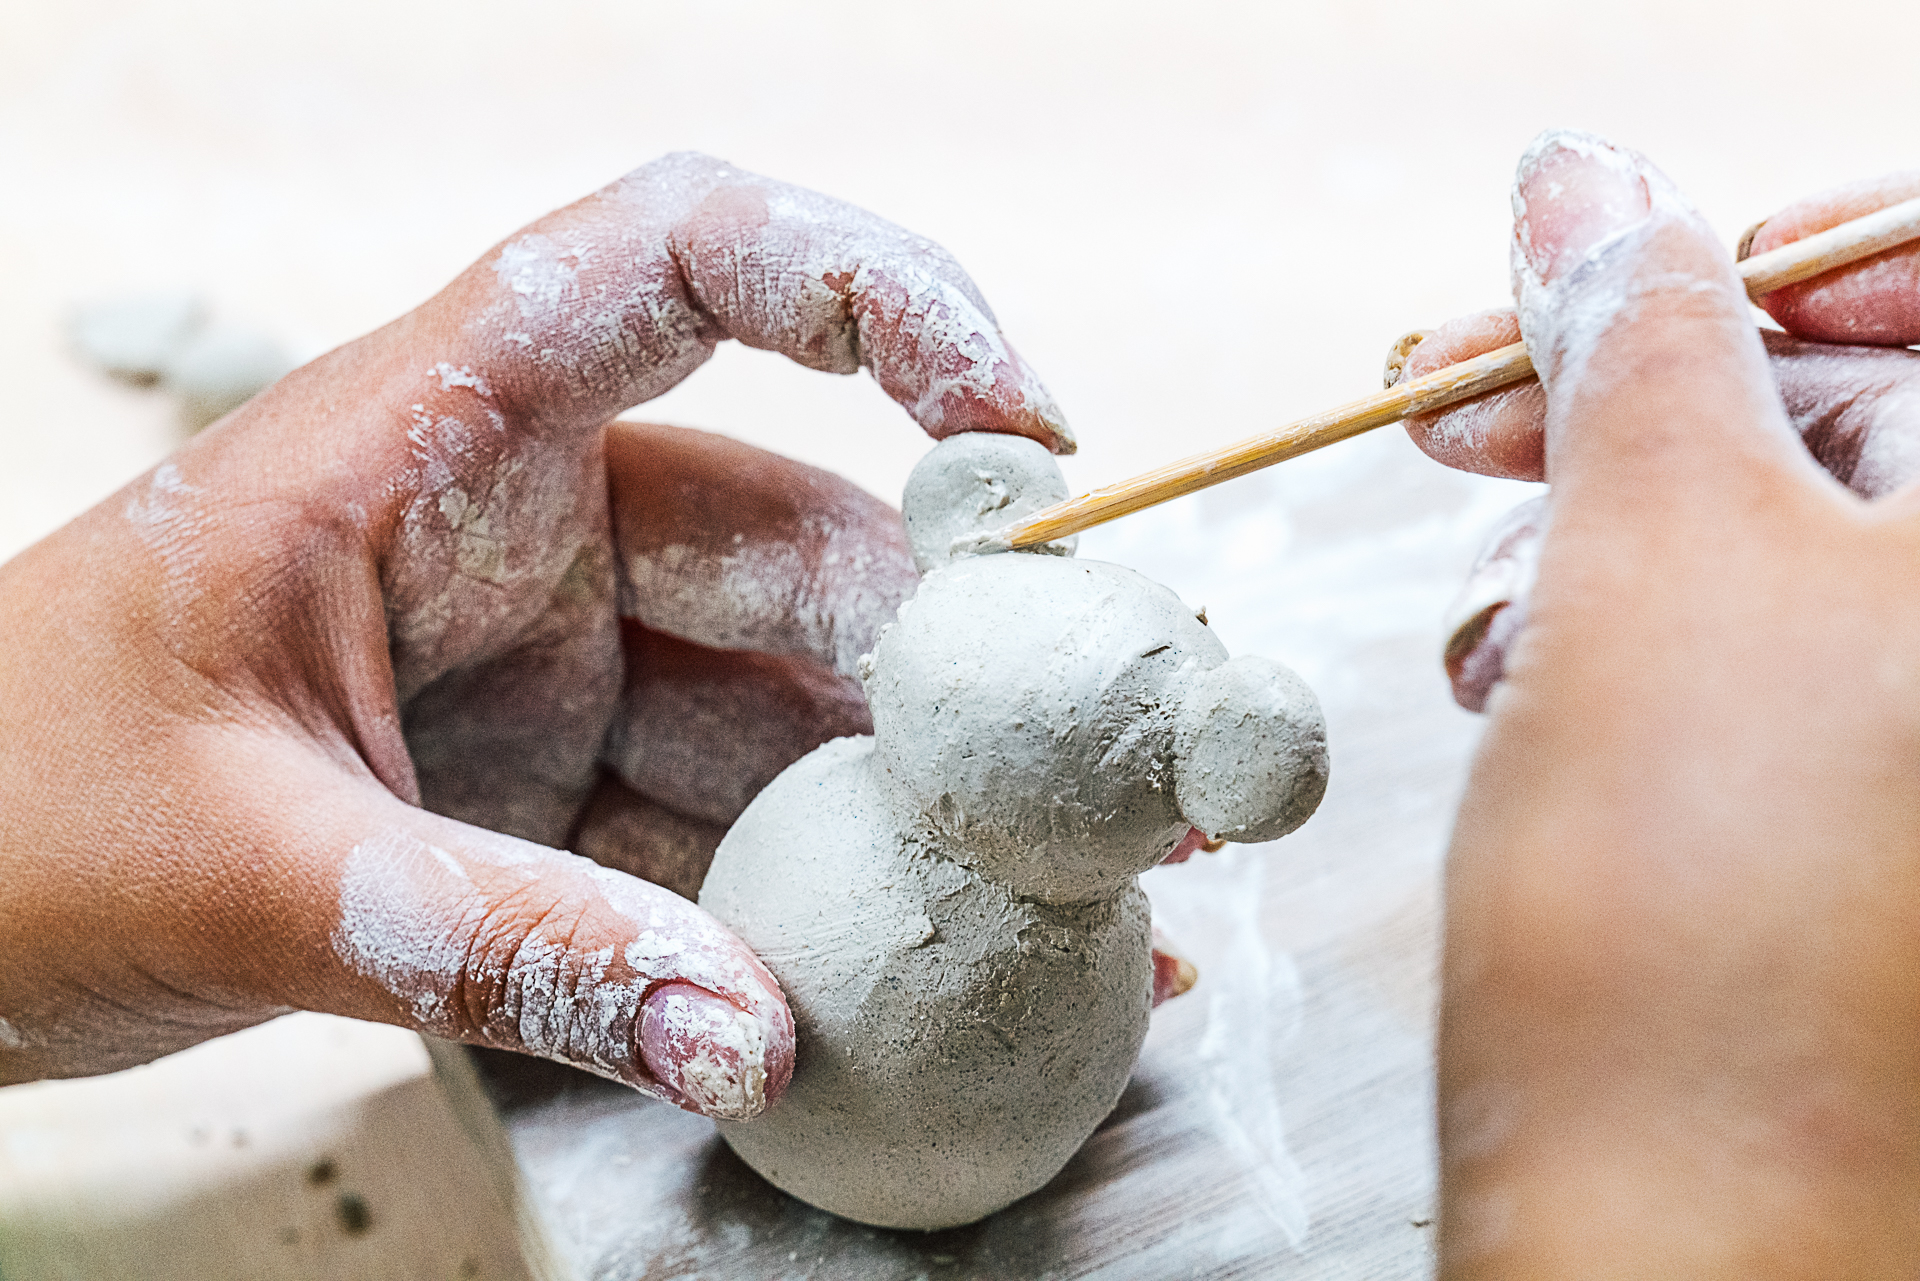 Childs hands shaping animal shape using white coloured clay.